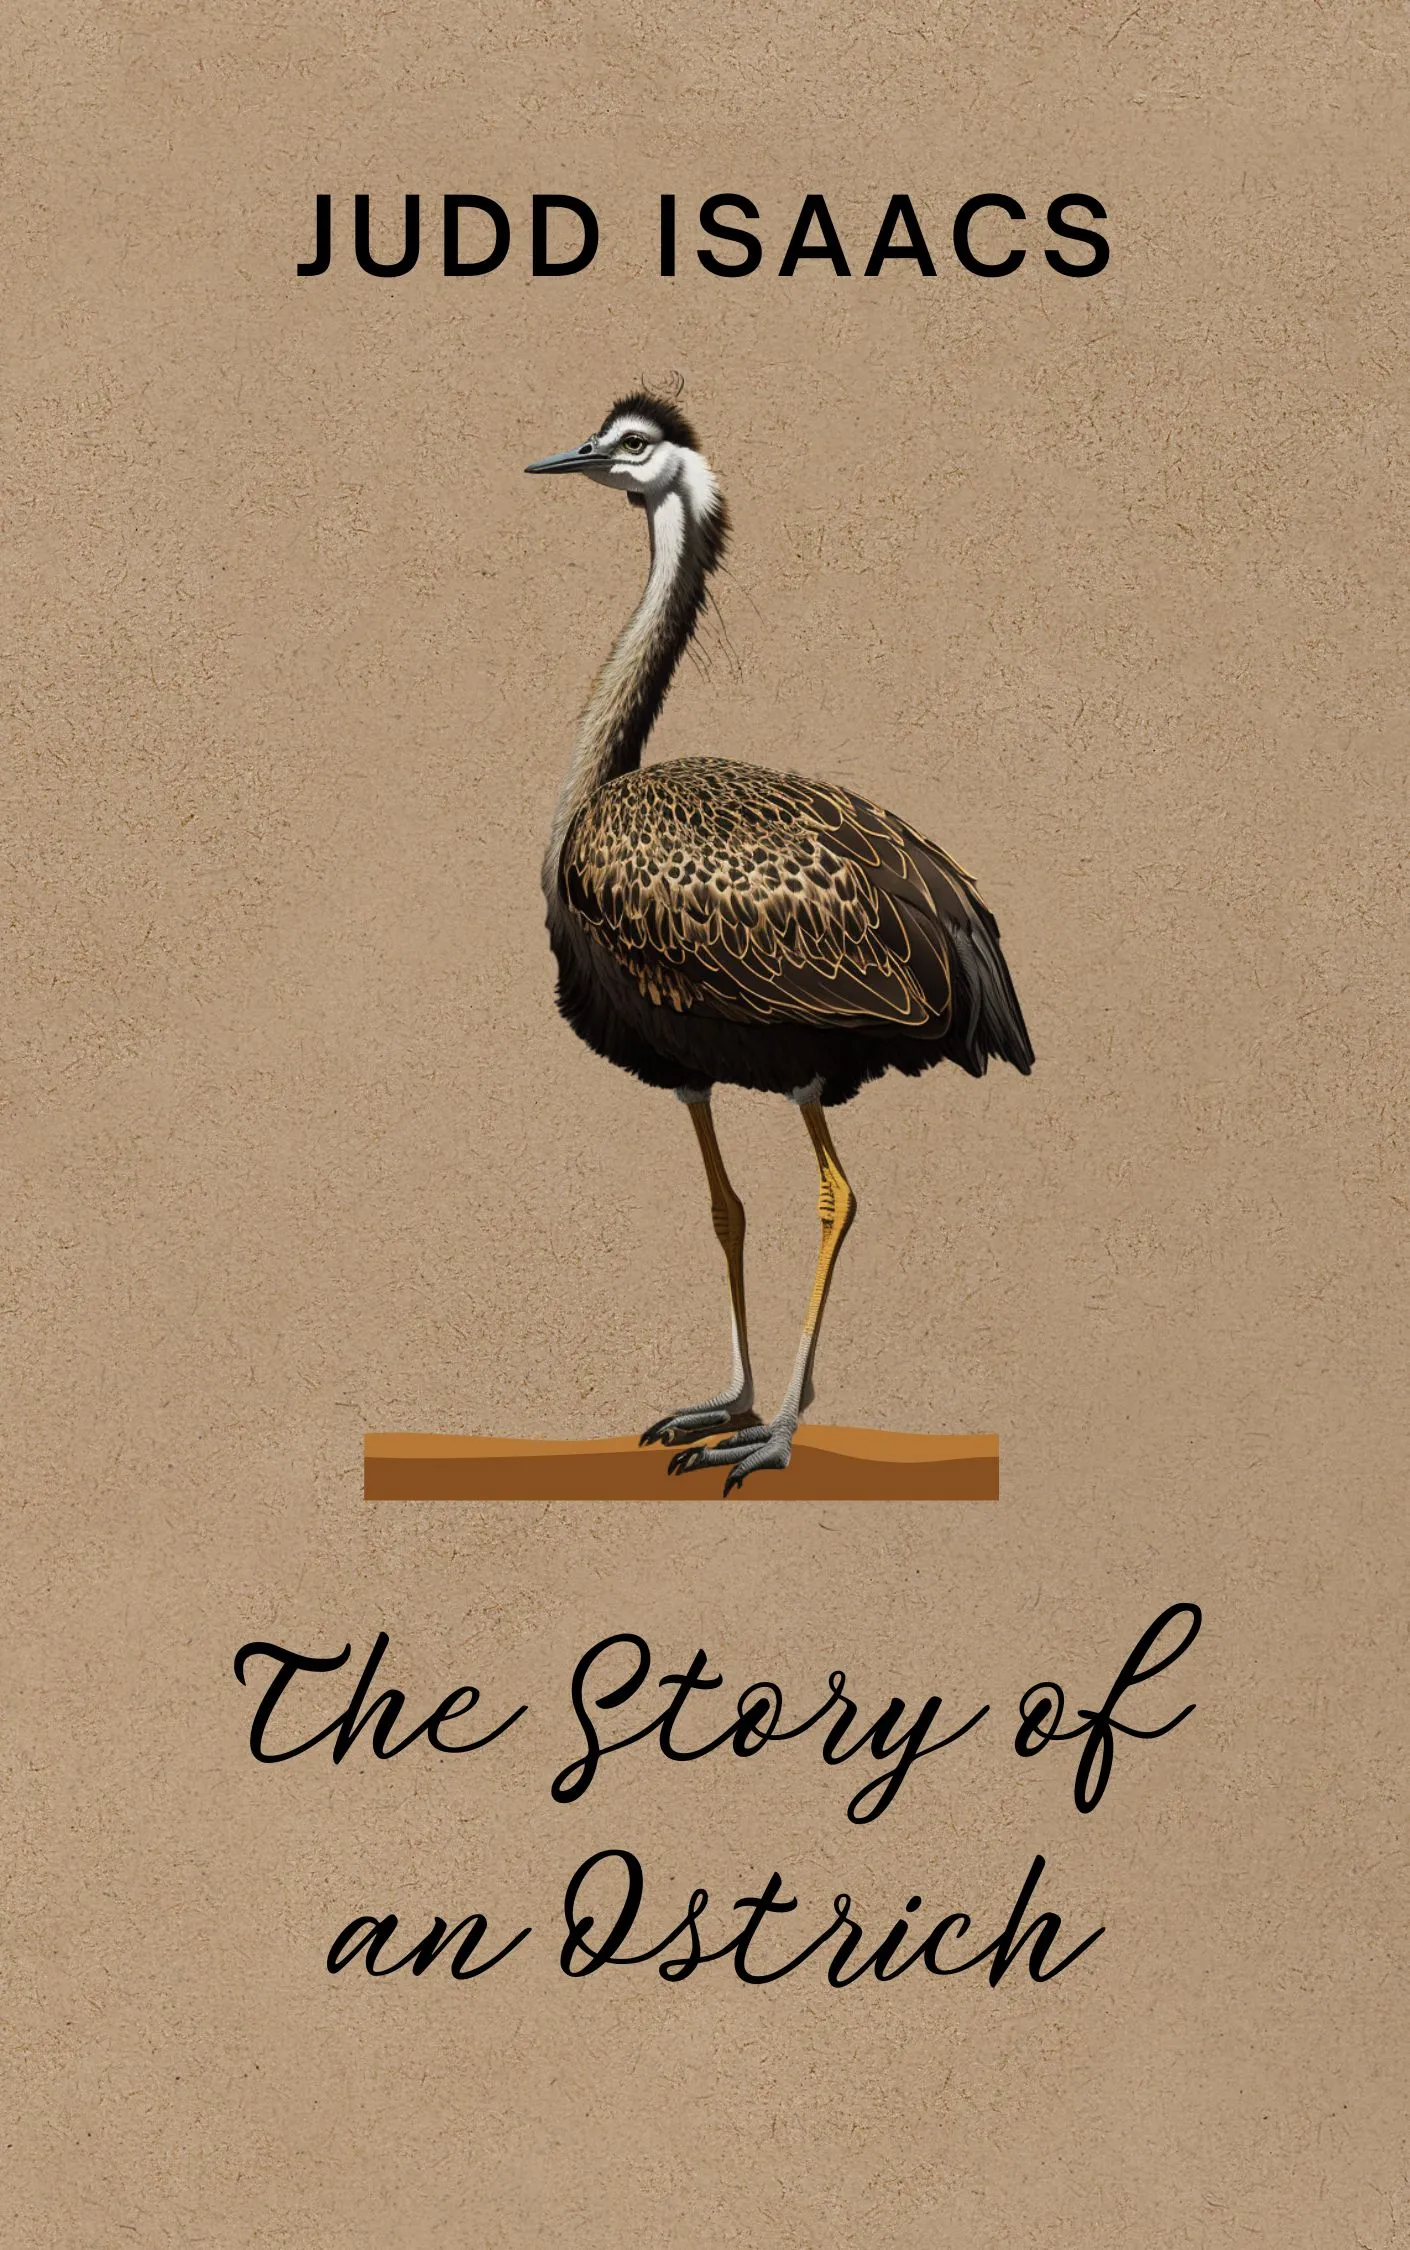 The Story of an Ostrich by Judd Isaacs Audiobook